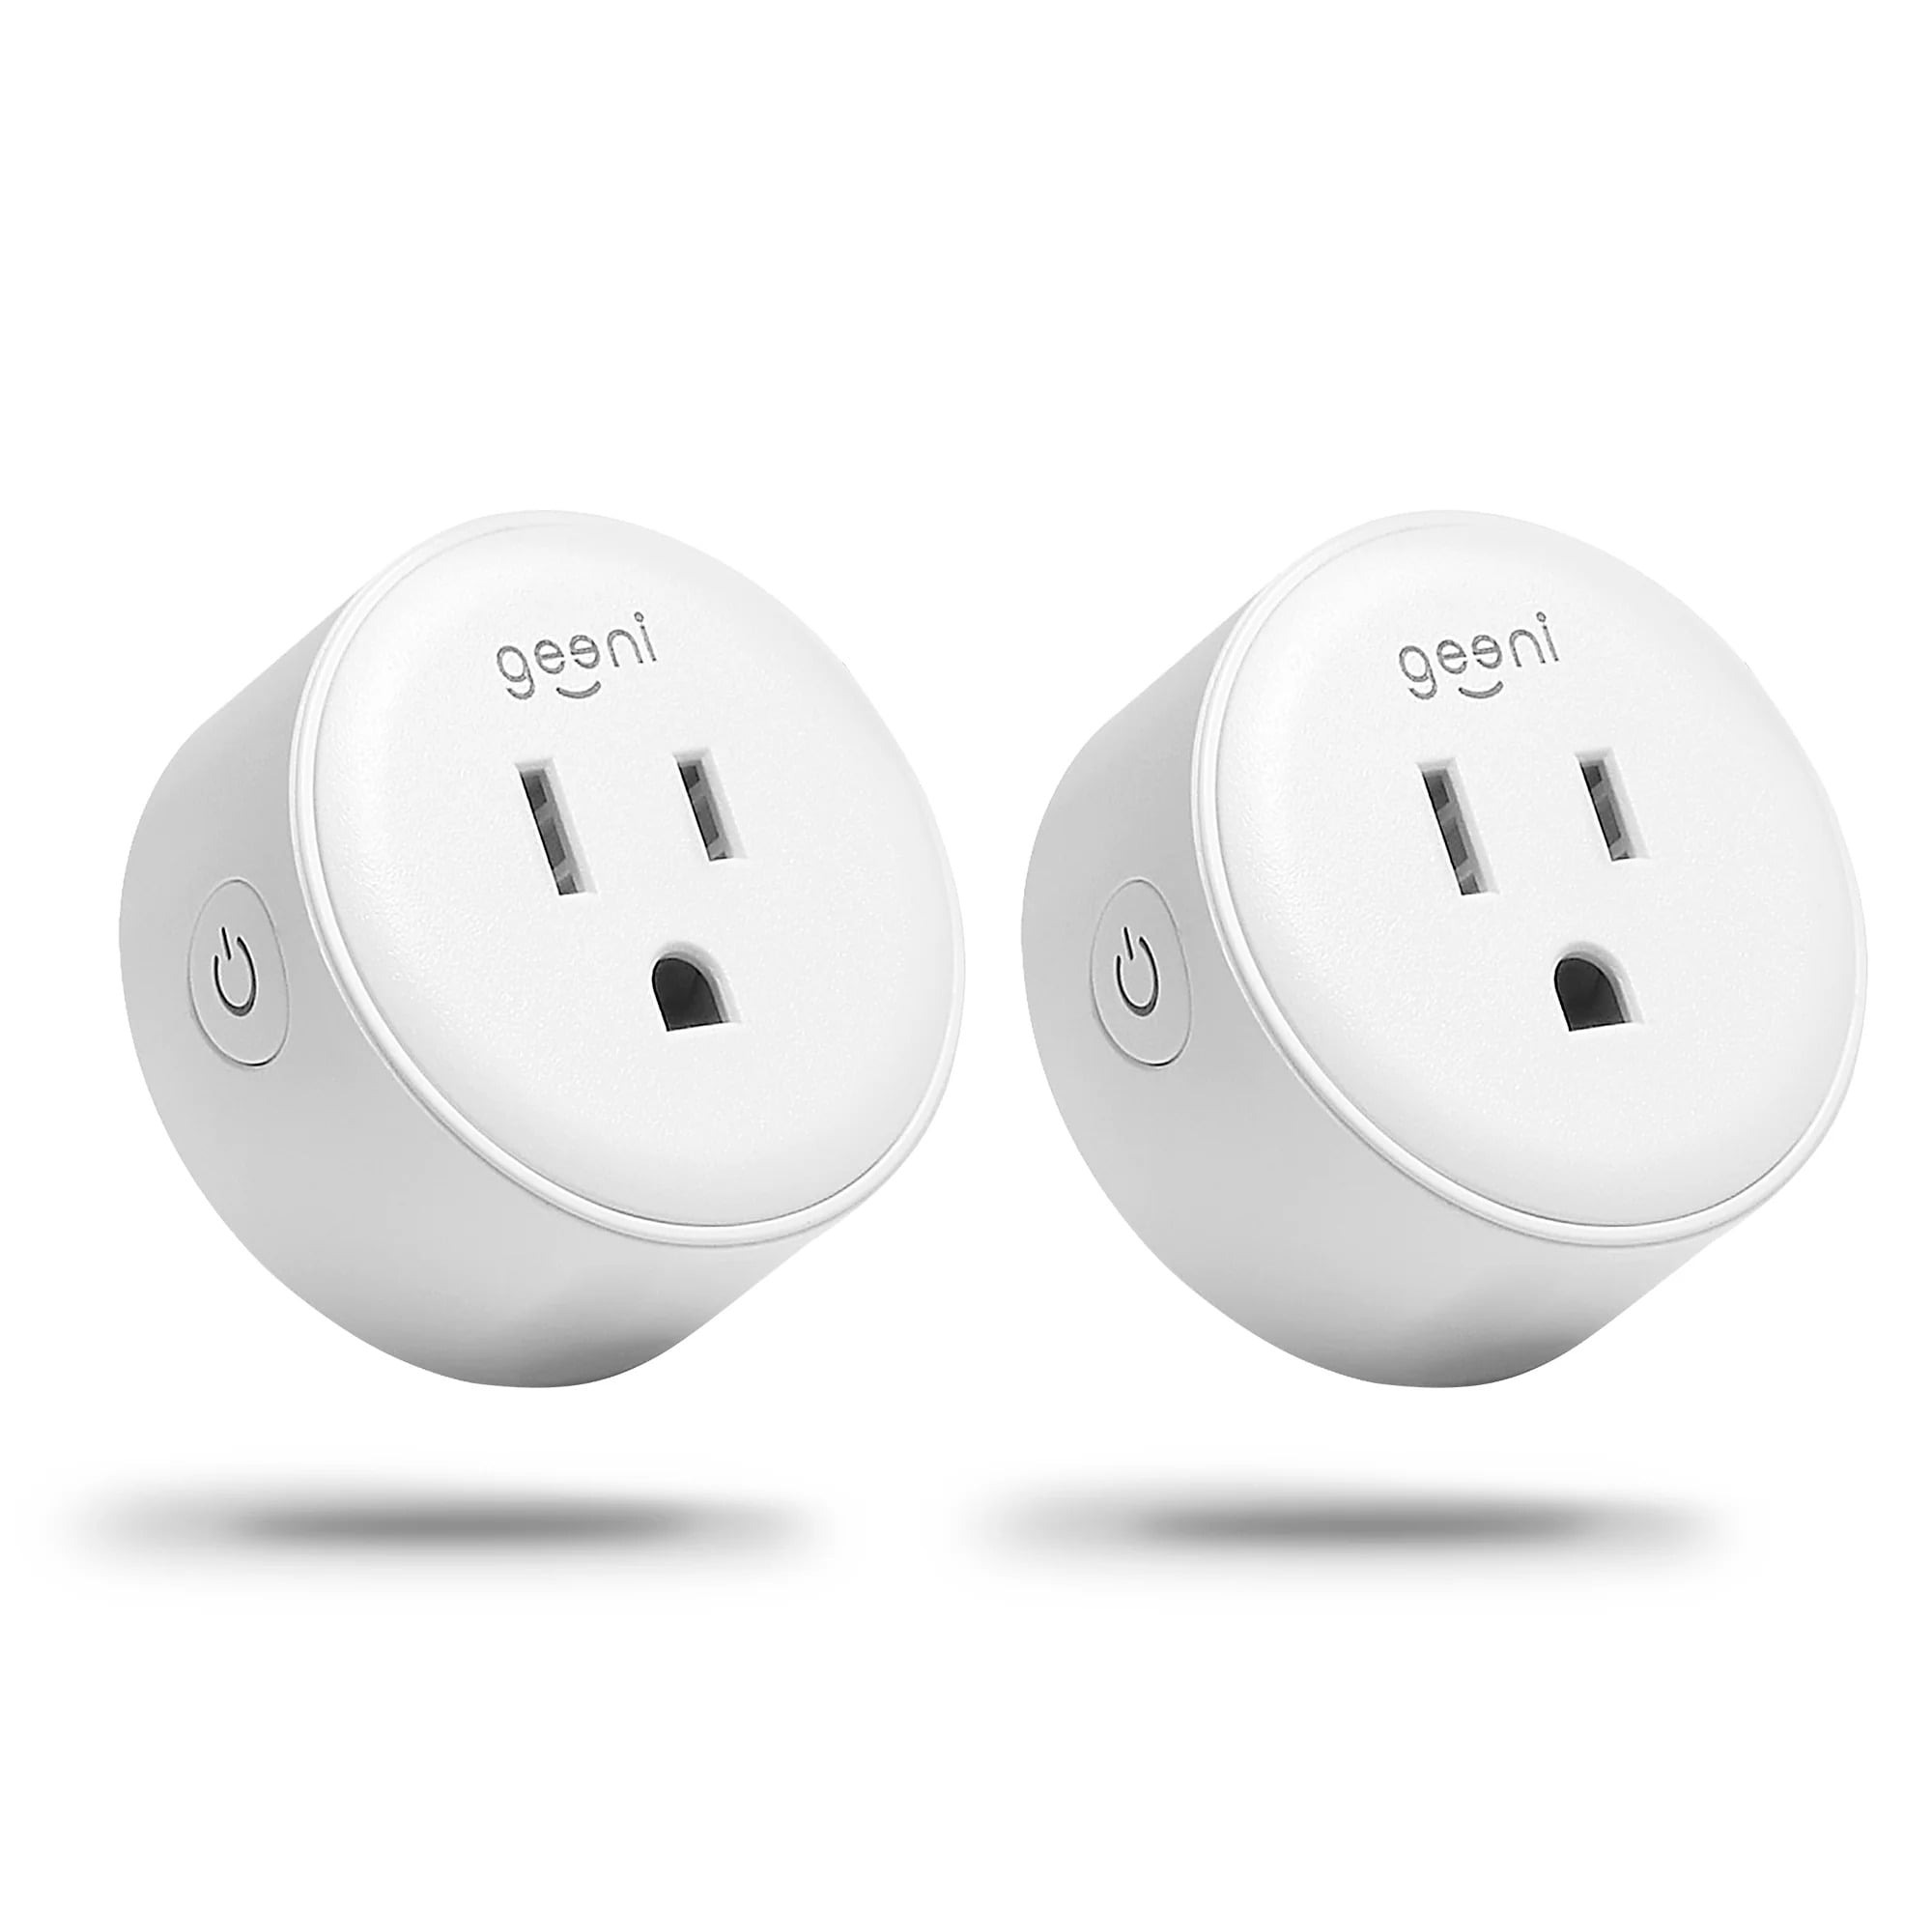 [2 Packs Smart Plug 10A 120V Mini WiFi Plug Smart Outlet](Type 1), Smart  Sockets Remote Control Plugs with Voice Control, Timer & Schedule